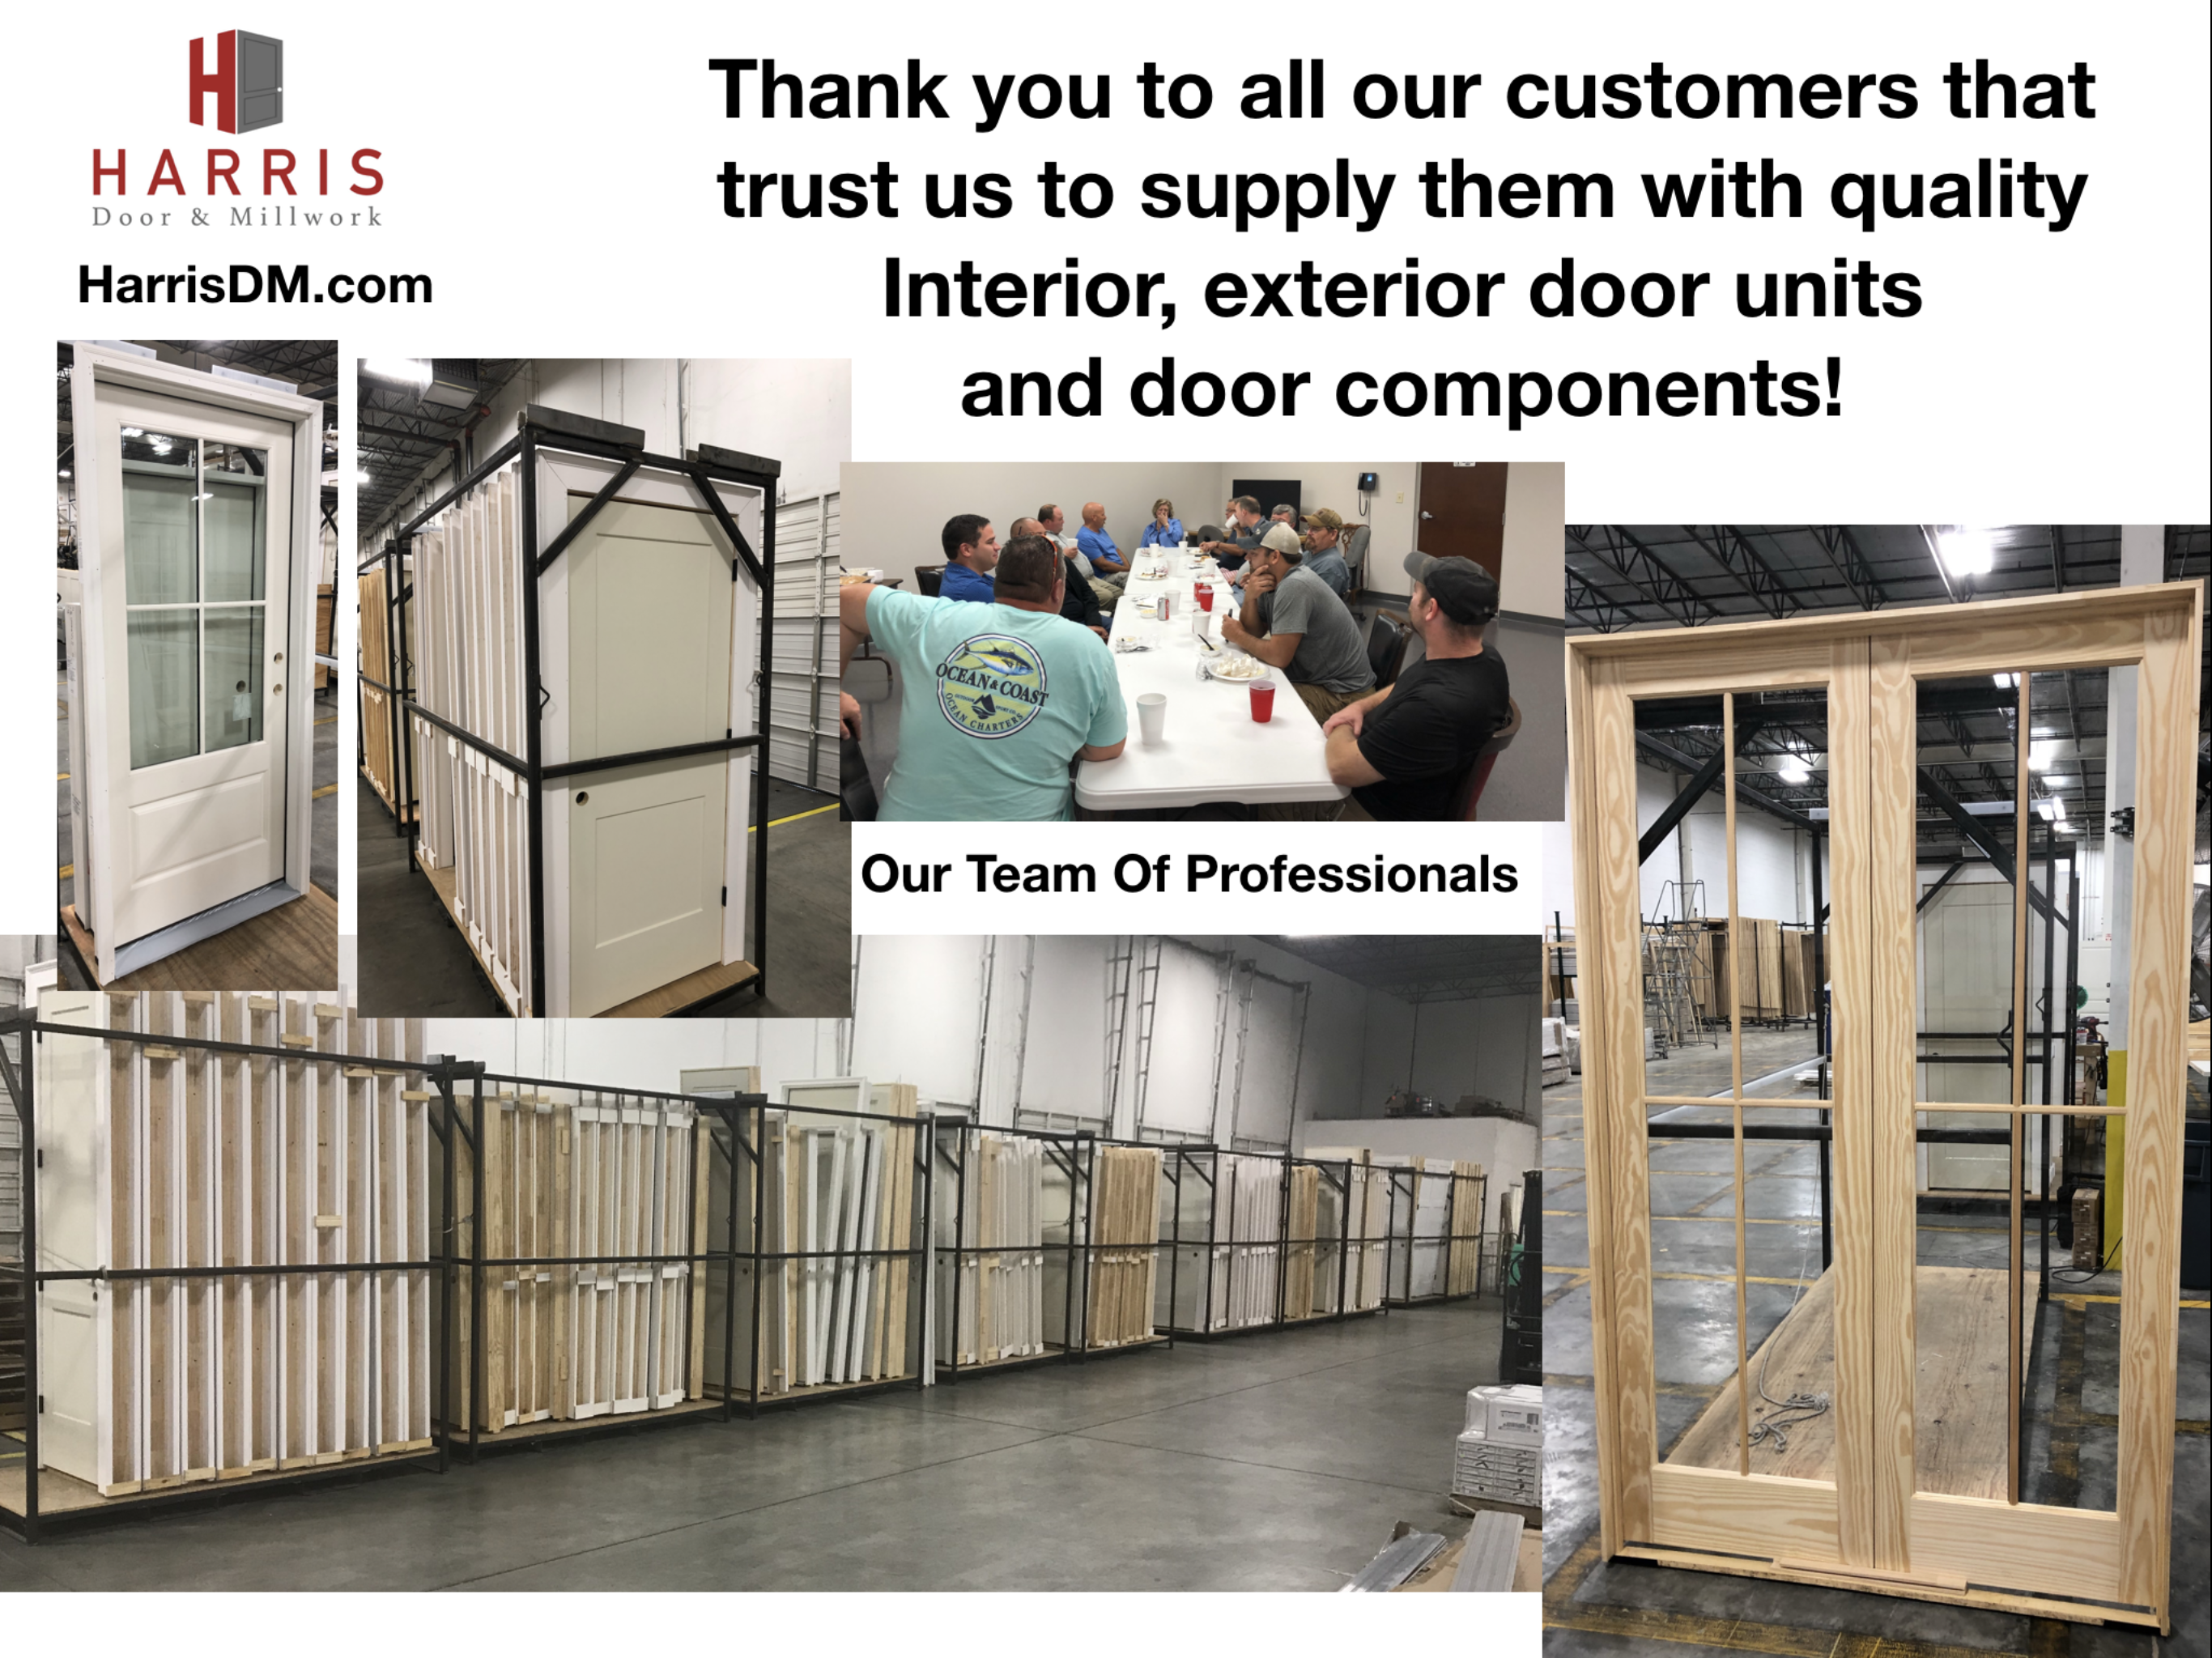 Thank you to our Customers!